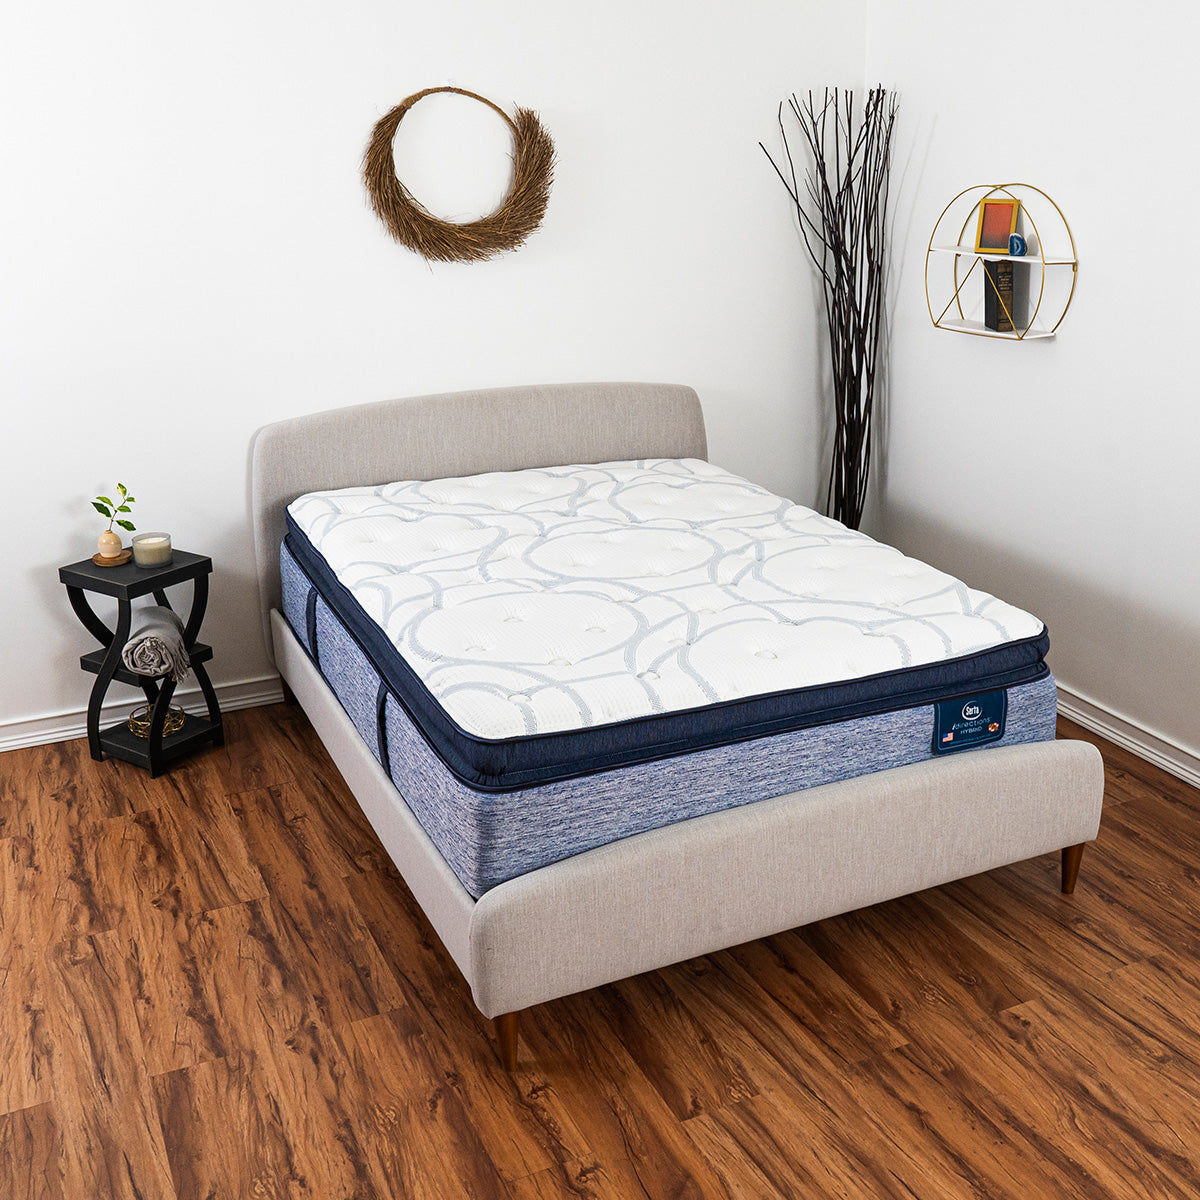 Serta iDirections X5 Hybrid II Plush Pillow Top Mattress On Bed Frame In Bedroom Overhead View